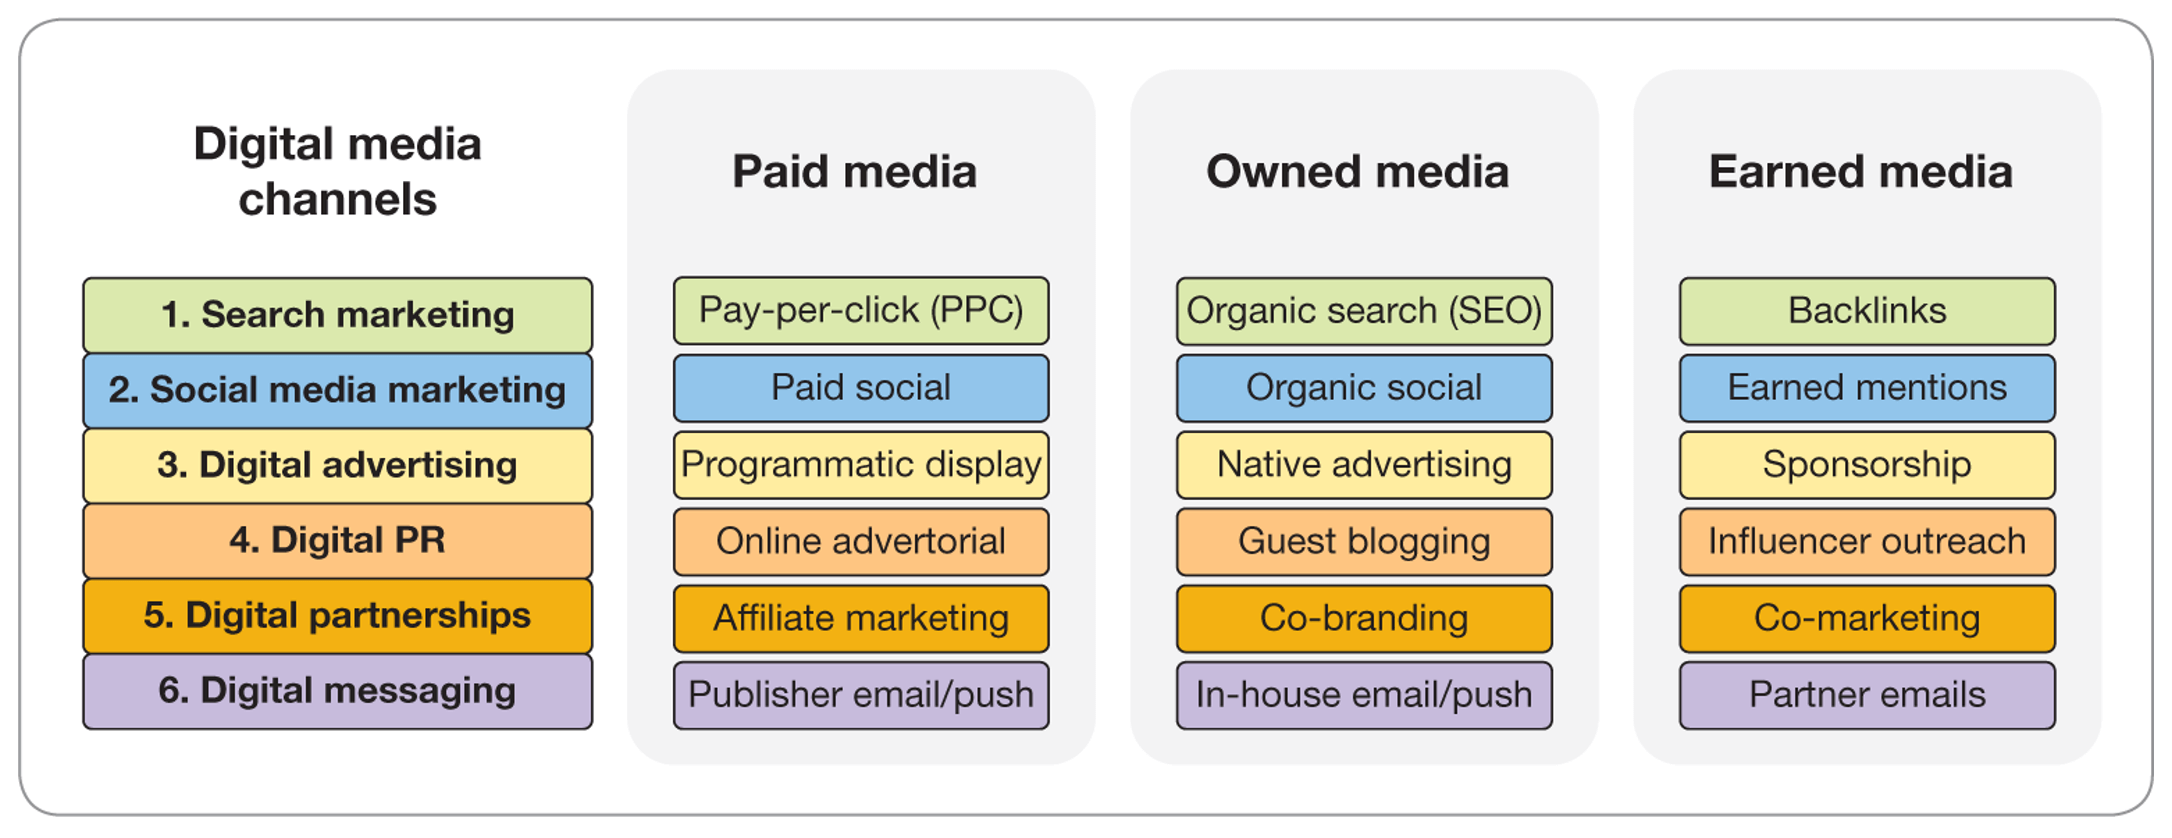 Maximizing ROI Top 3 Paid Search Campaign Uses in 2023